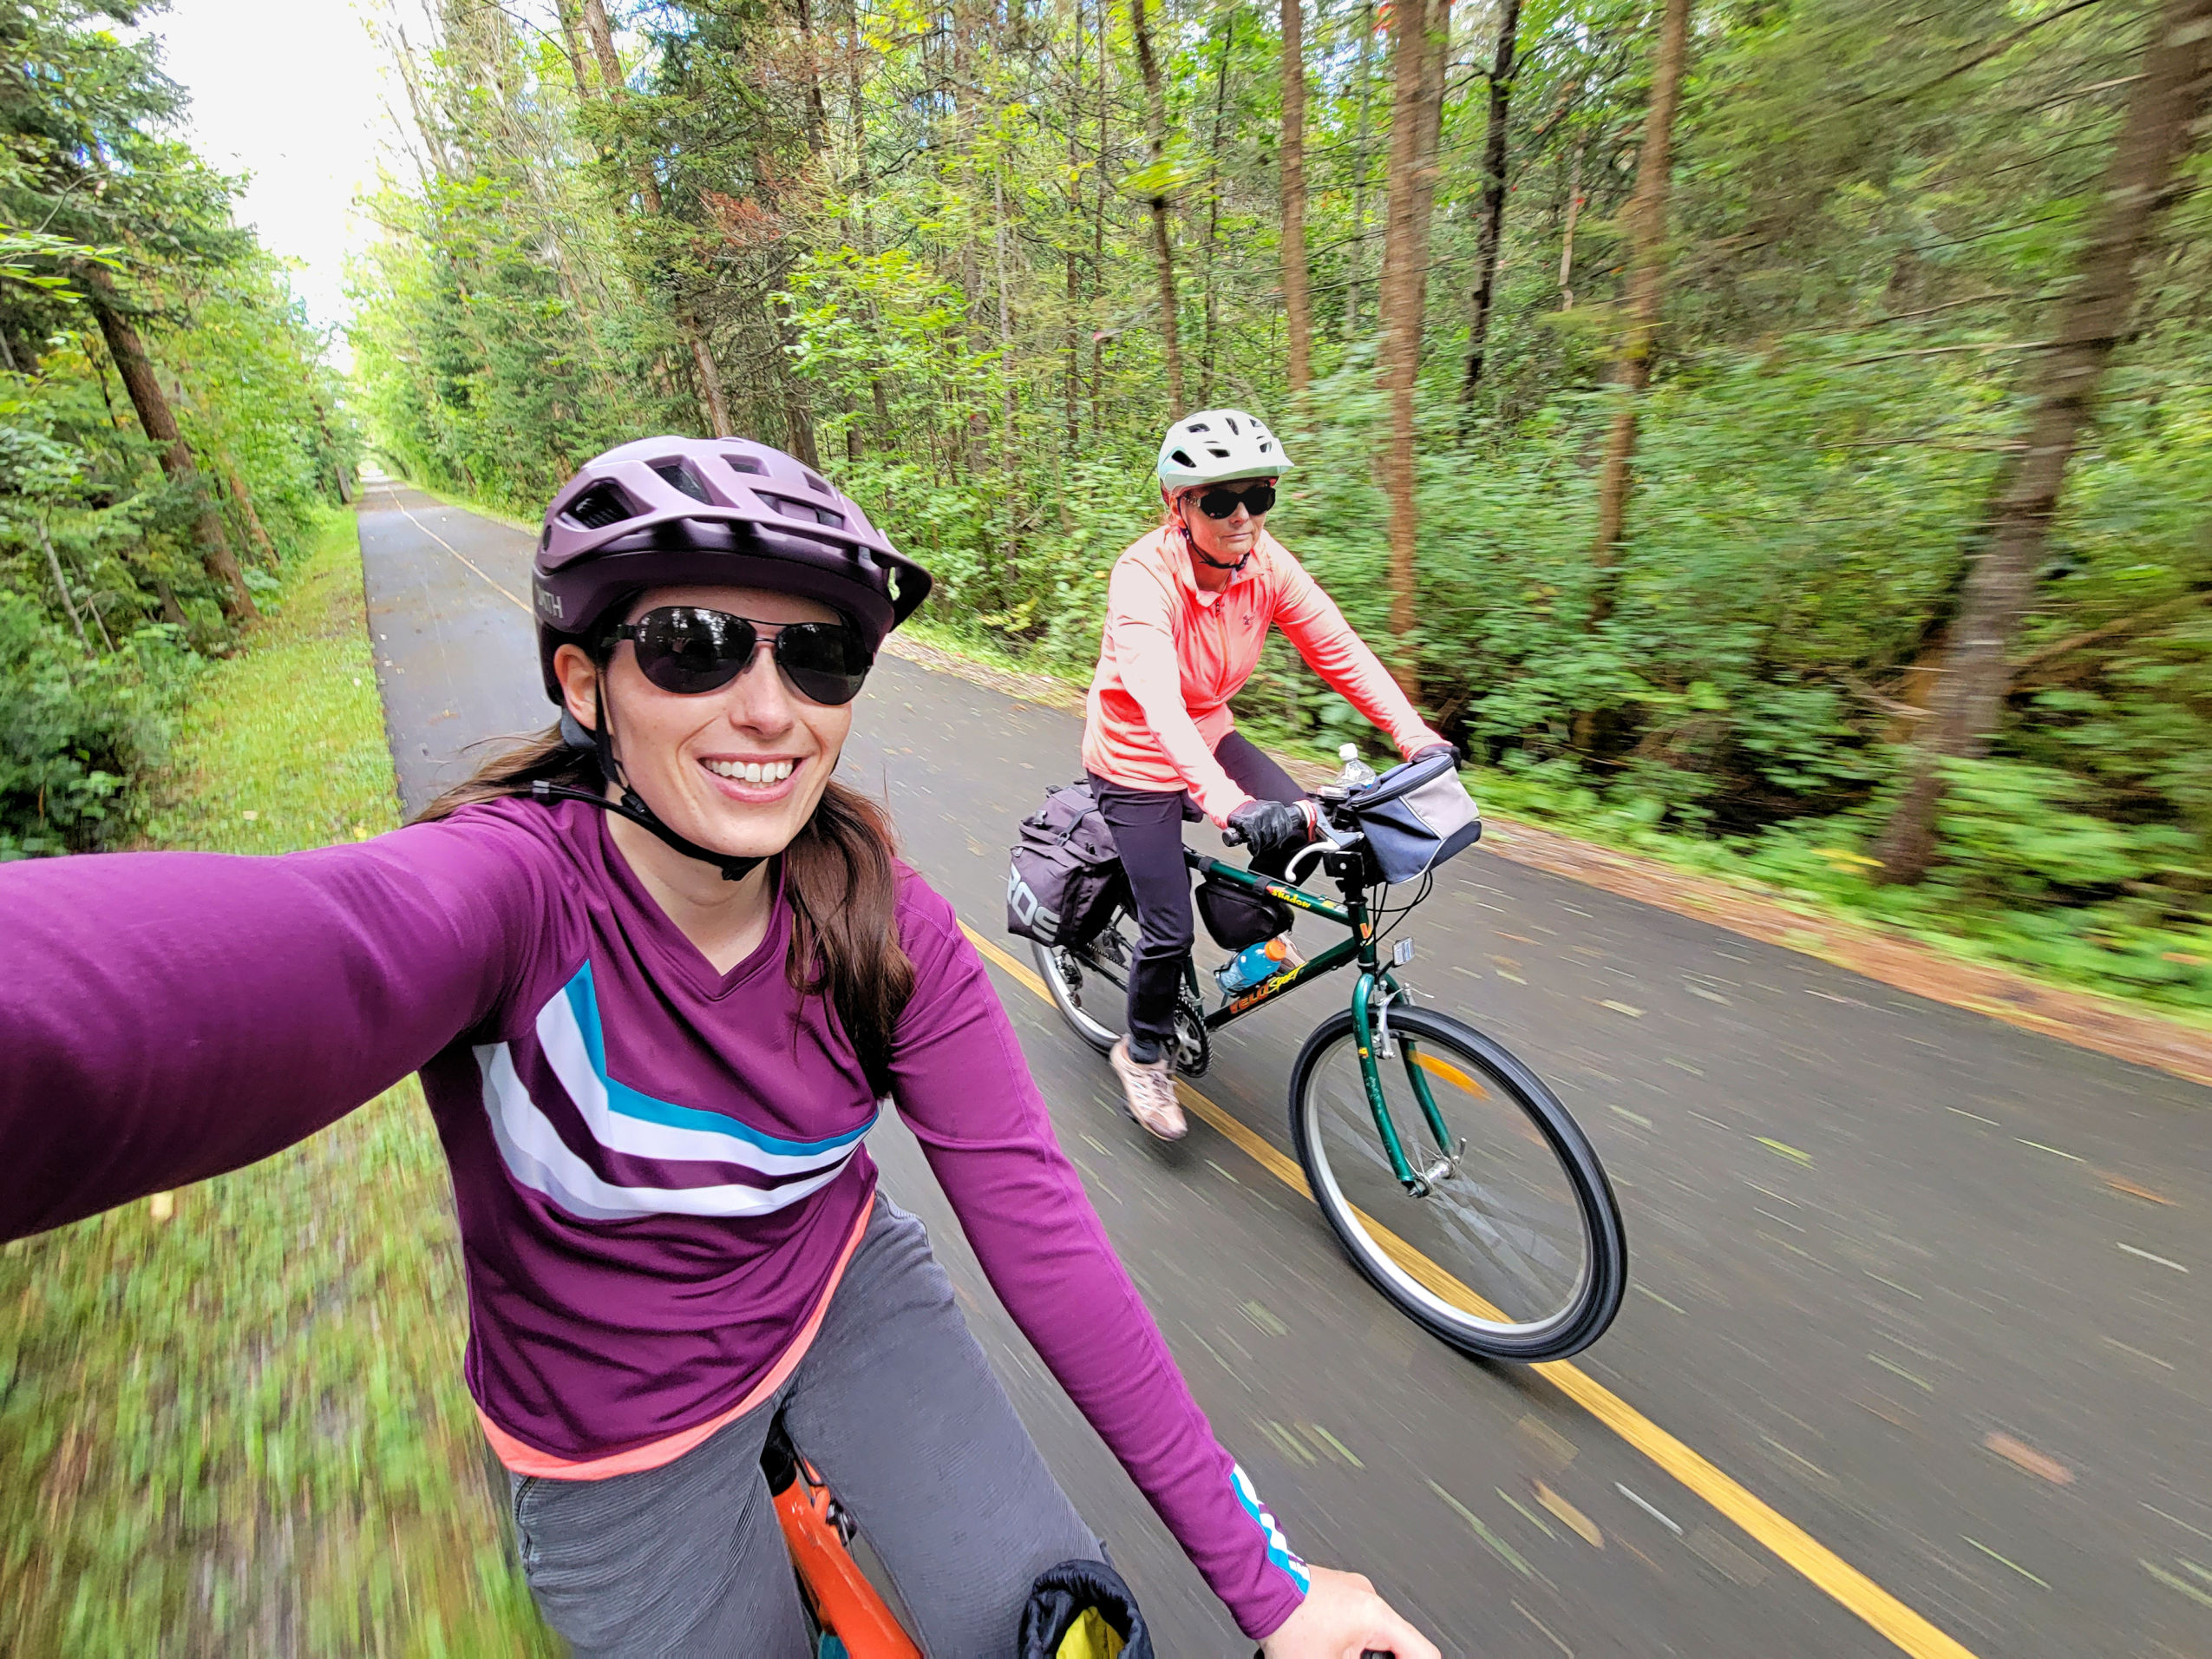 woman takes a selfie while riding a bicycle along a paved forest trail